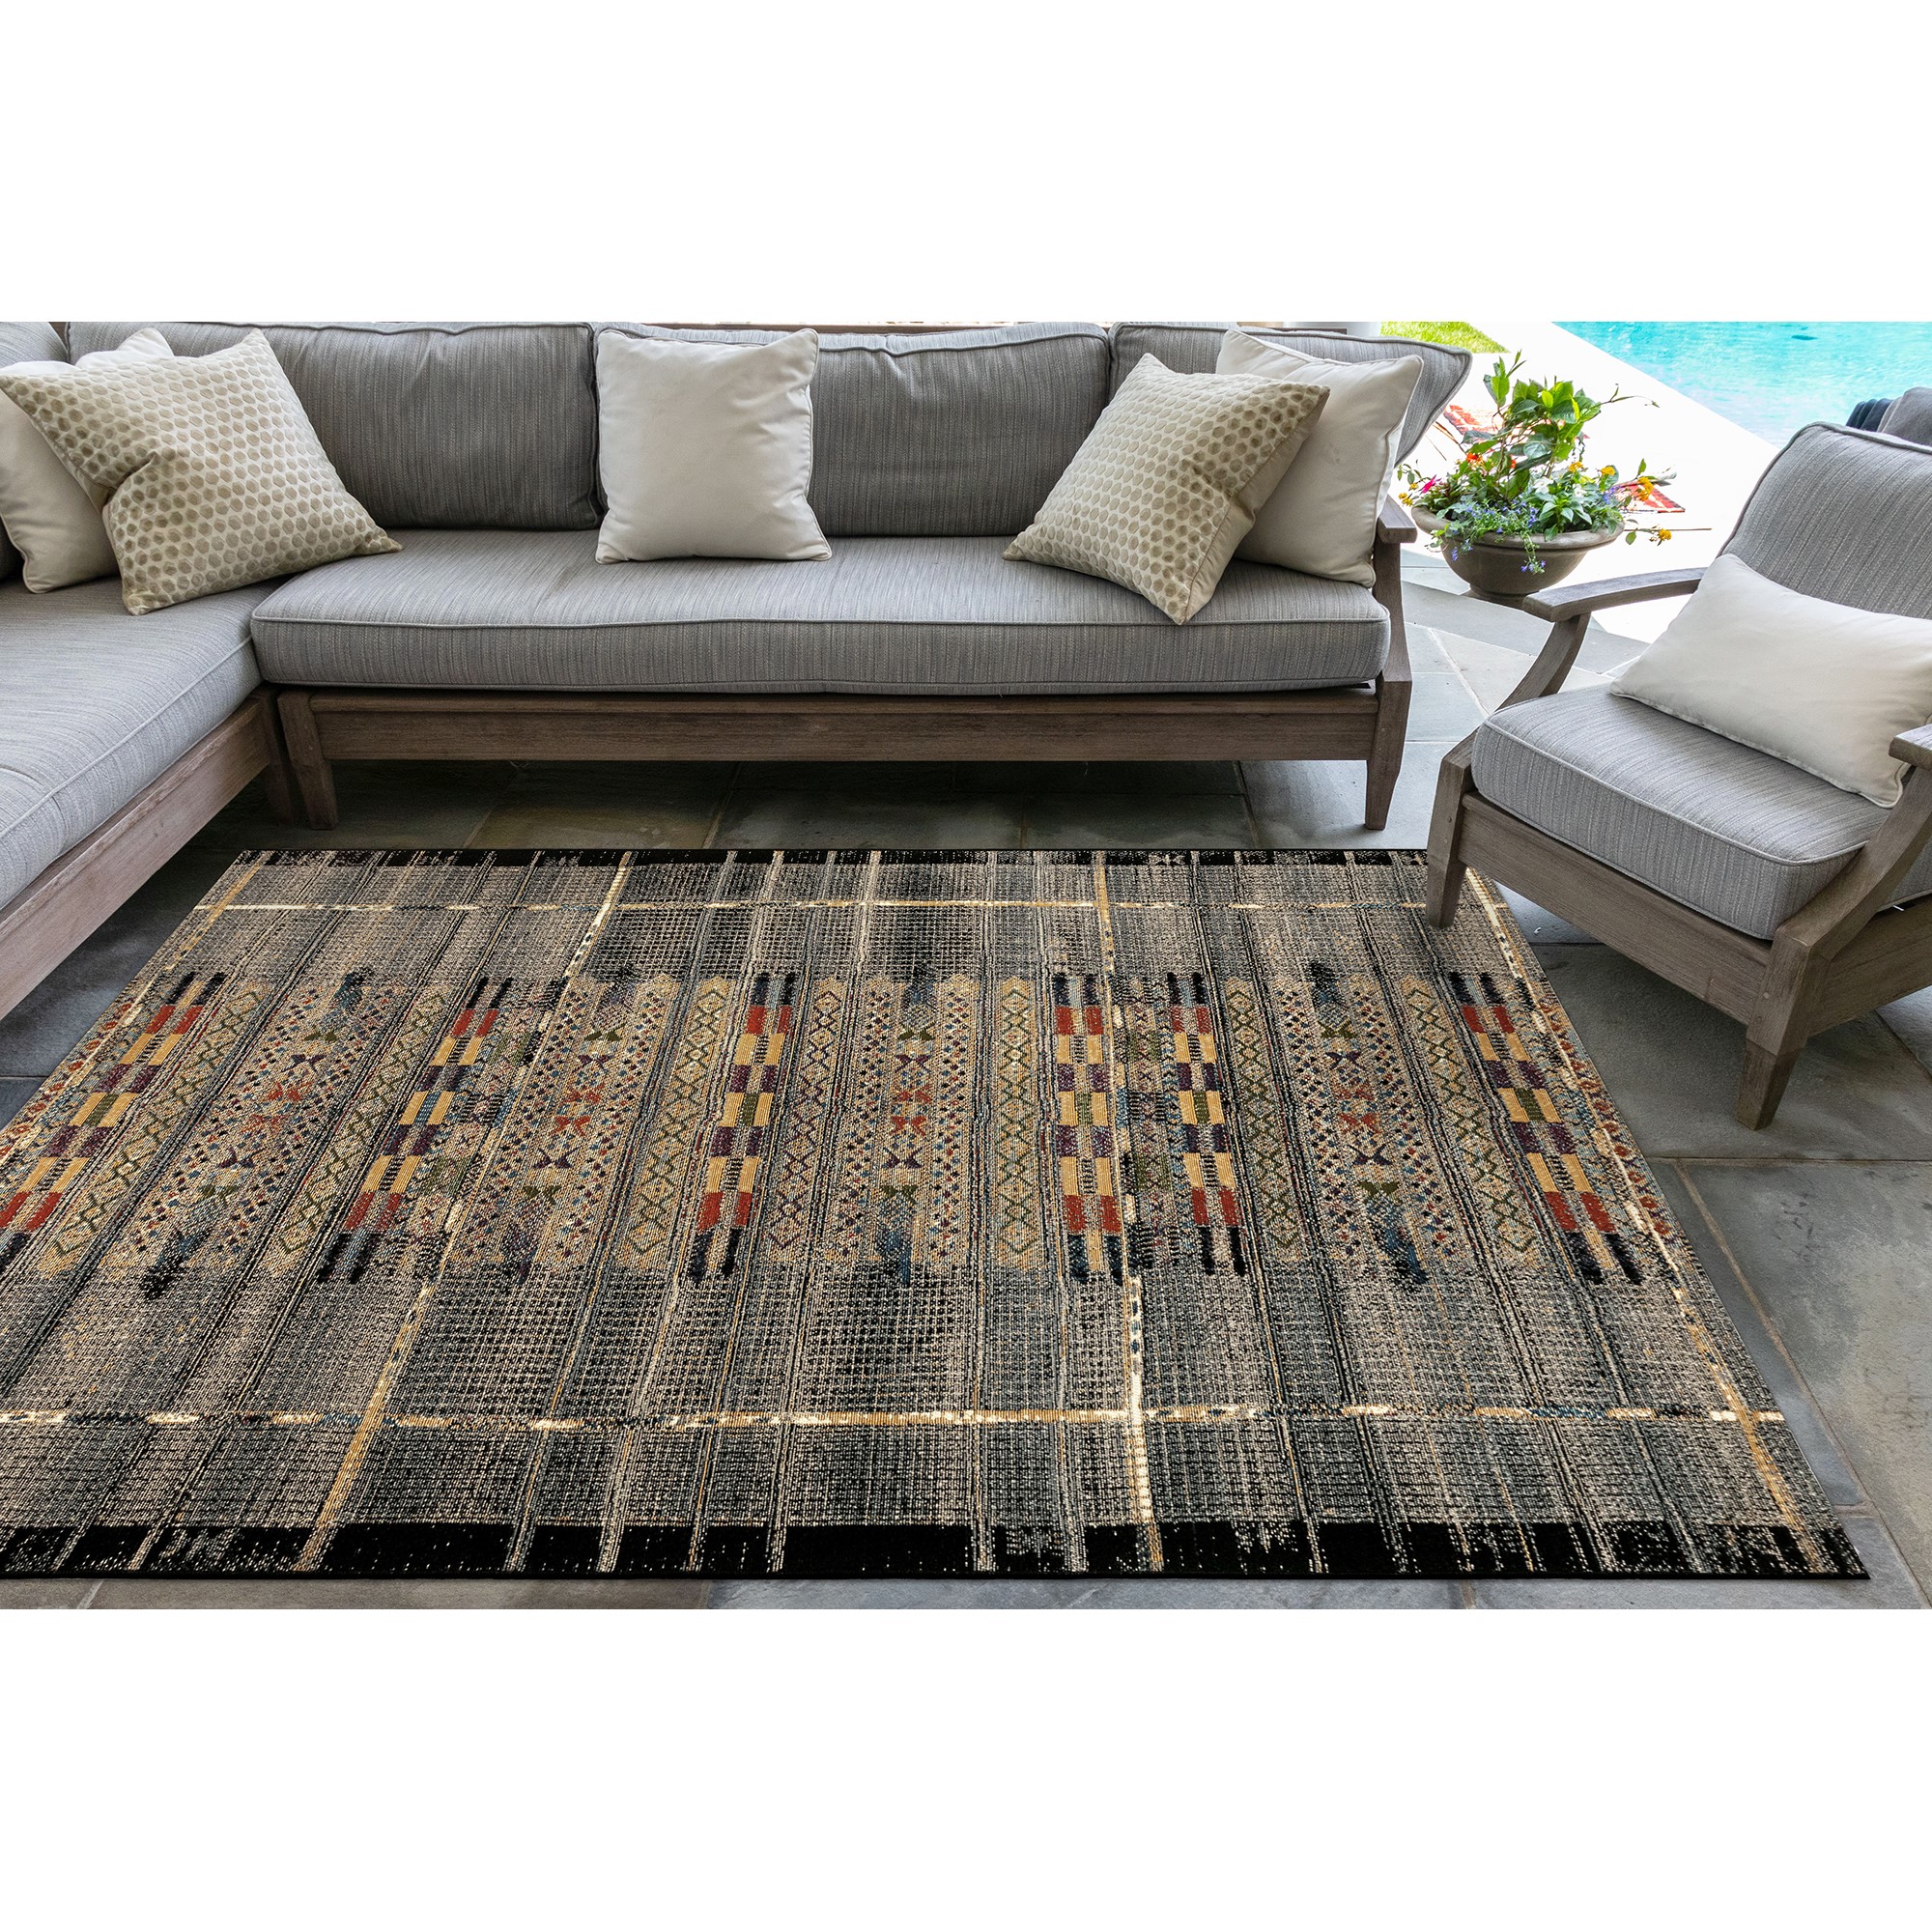 8'10 x 11'9 Liora Manne Marina Indoor Outdoor Rug UV Stabilized Tribal Design Power Loomed Tribal Stripe Red Comfortable & Durable Polypropylene Material